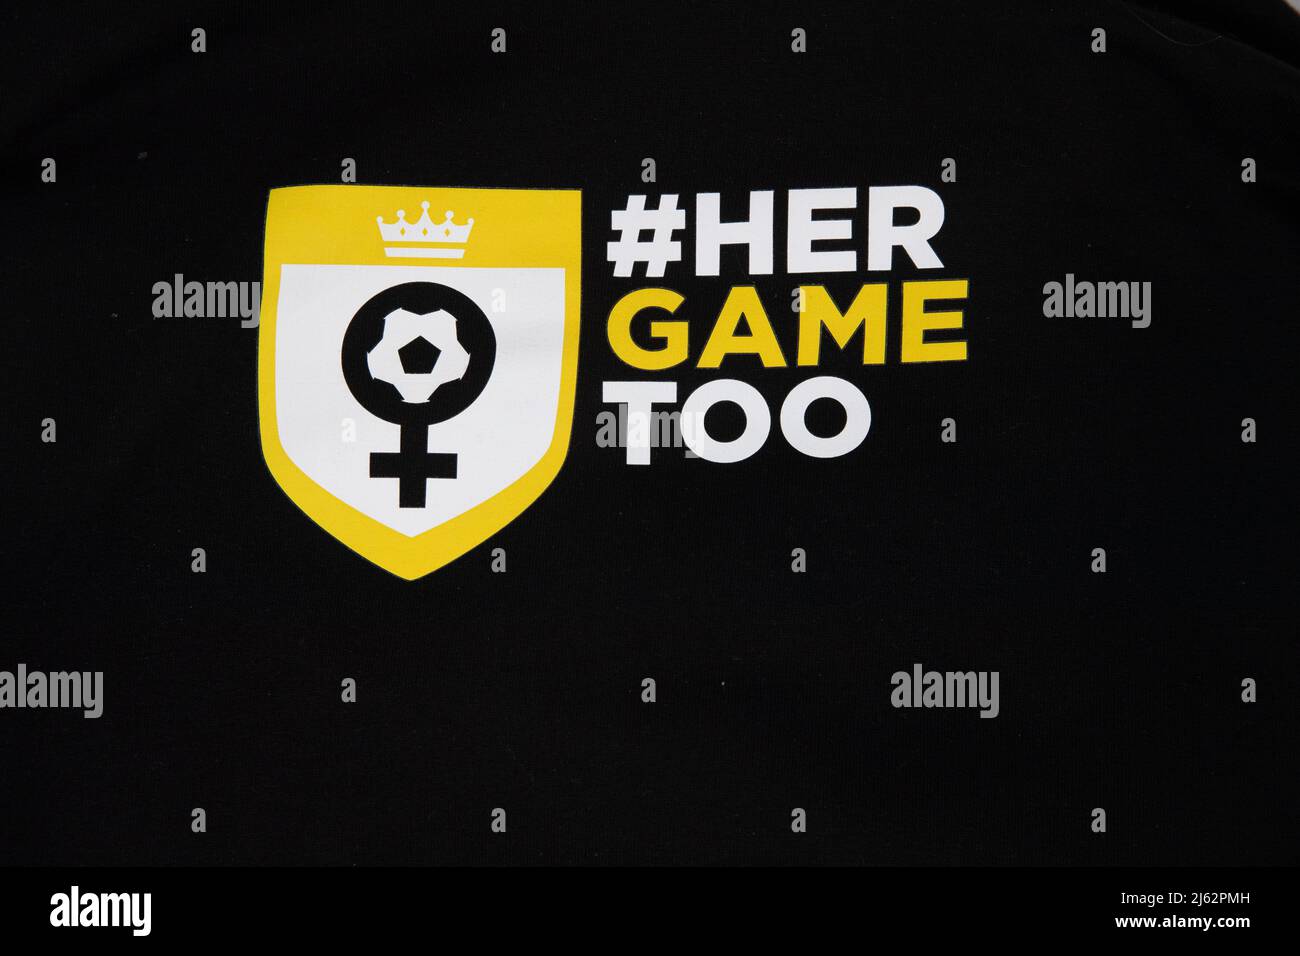 Her Game Too Logo on front of a hoody Stock Photo